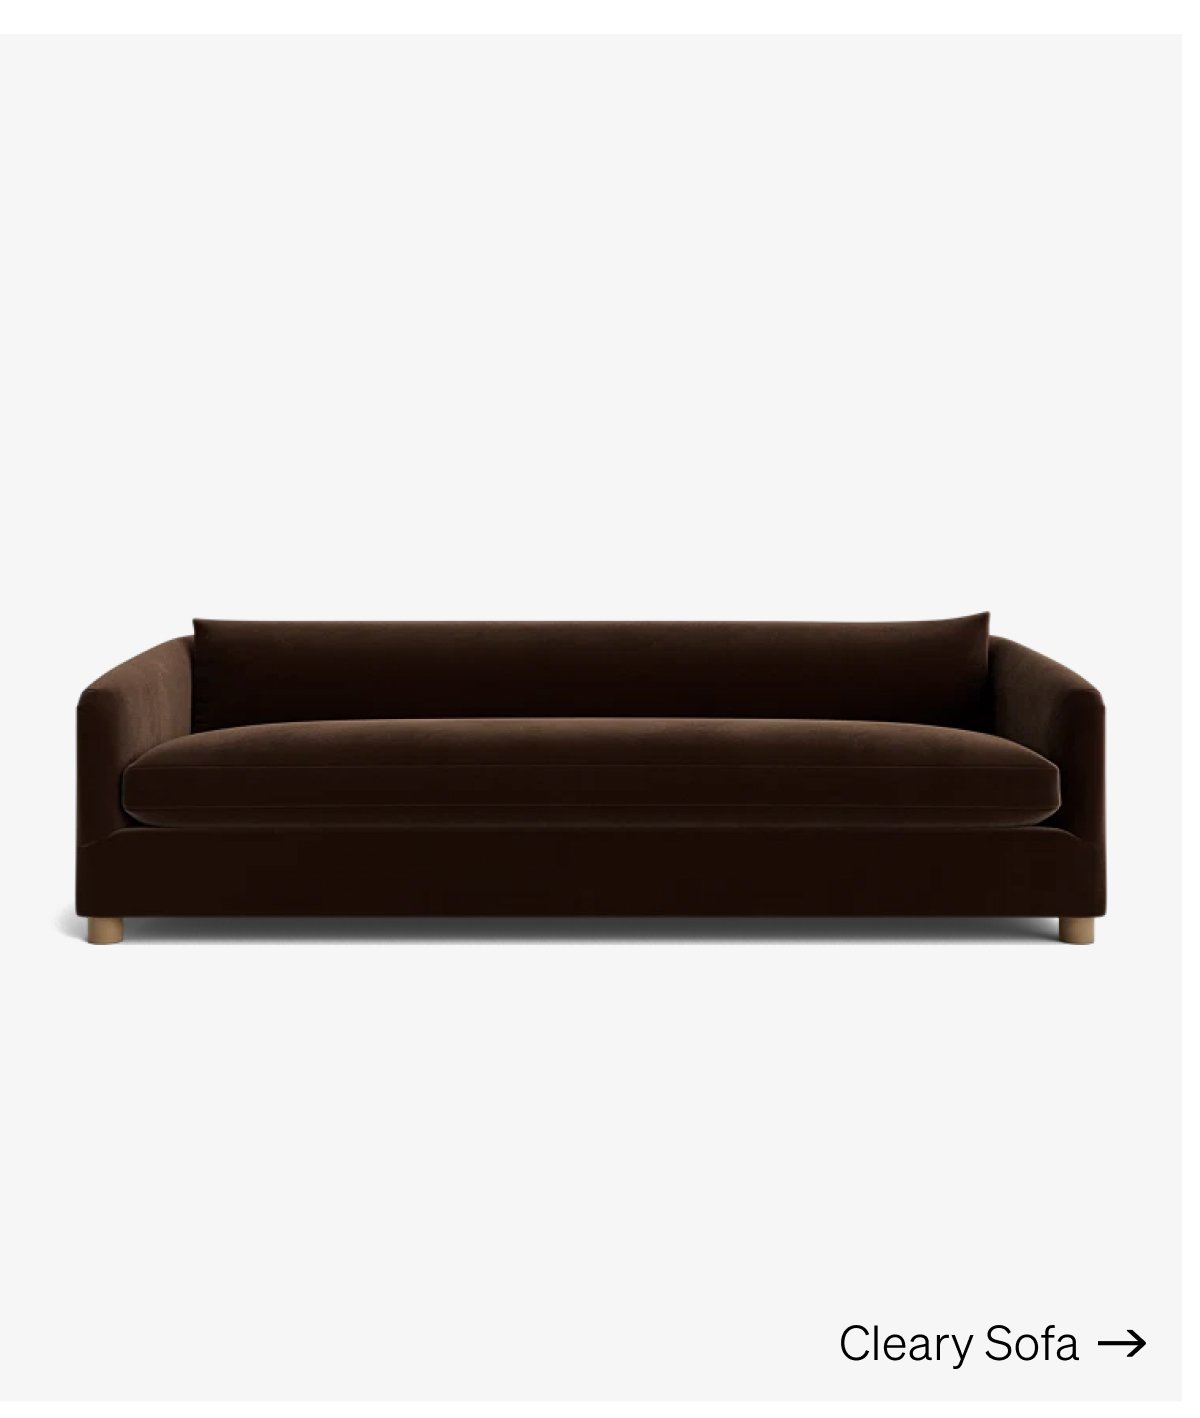 Shop Cleary Sofa